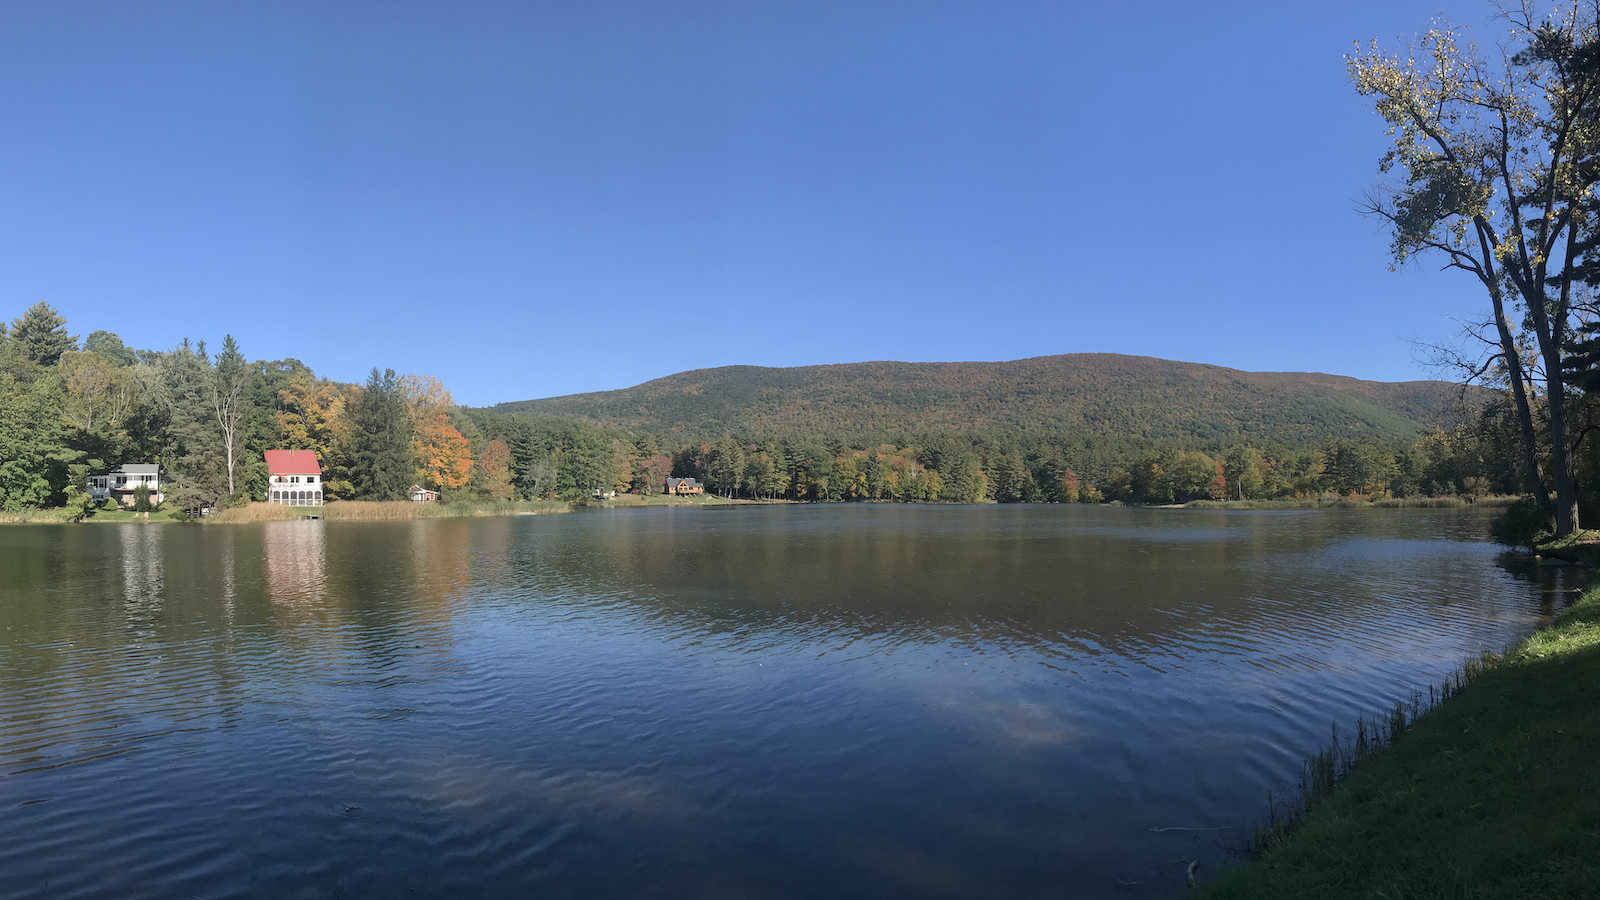 A serene view of Windsor Lake in North Adams, Massachusetts. The calm water of the lake reflects the clear blue sky and the surrounding lush, green forest. A few houses with vibrant red roofs are nestled among the trees on the lake's edge. The backdrop features a gentle slope of a forested mountain, with a green foliage.